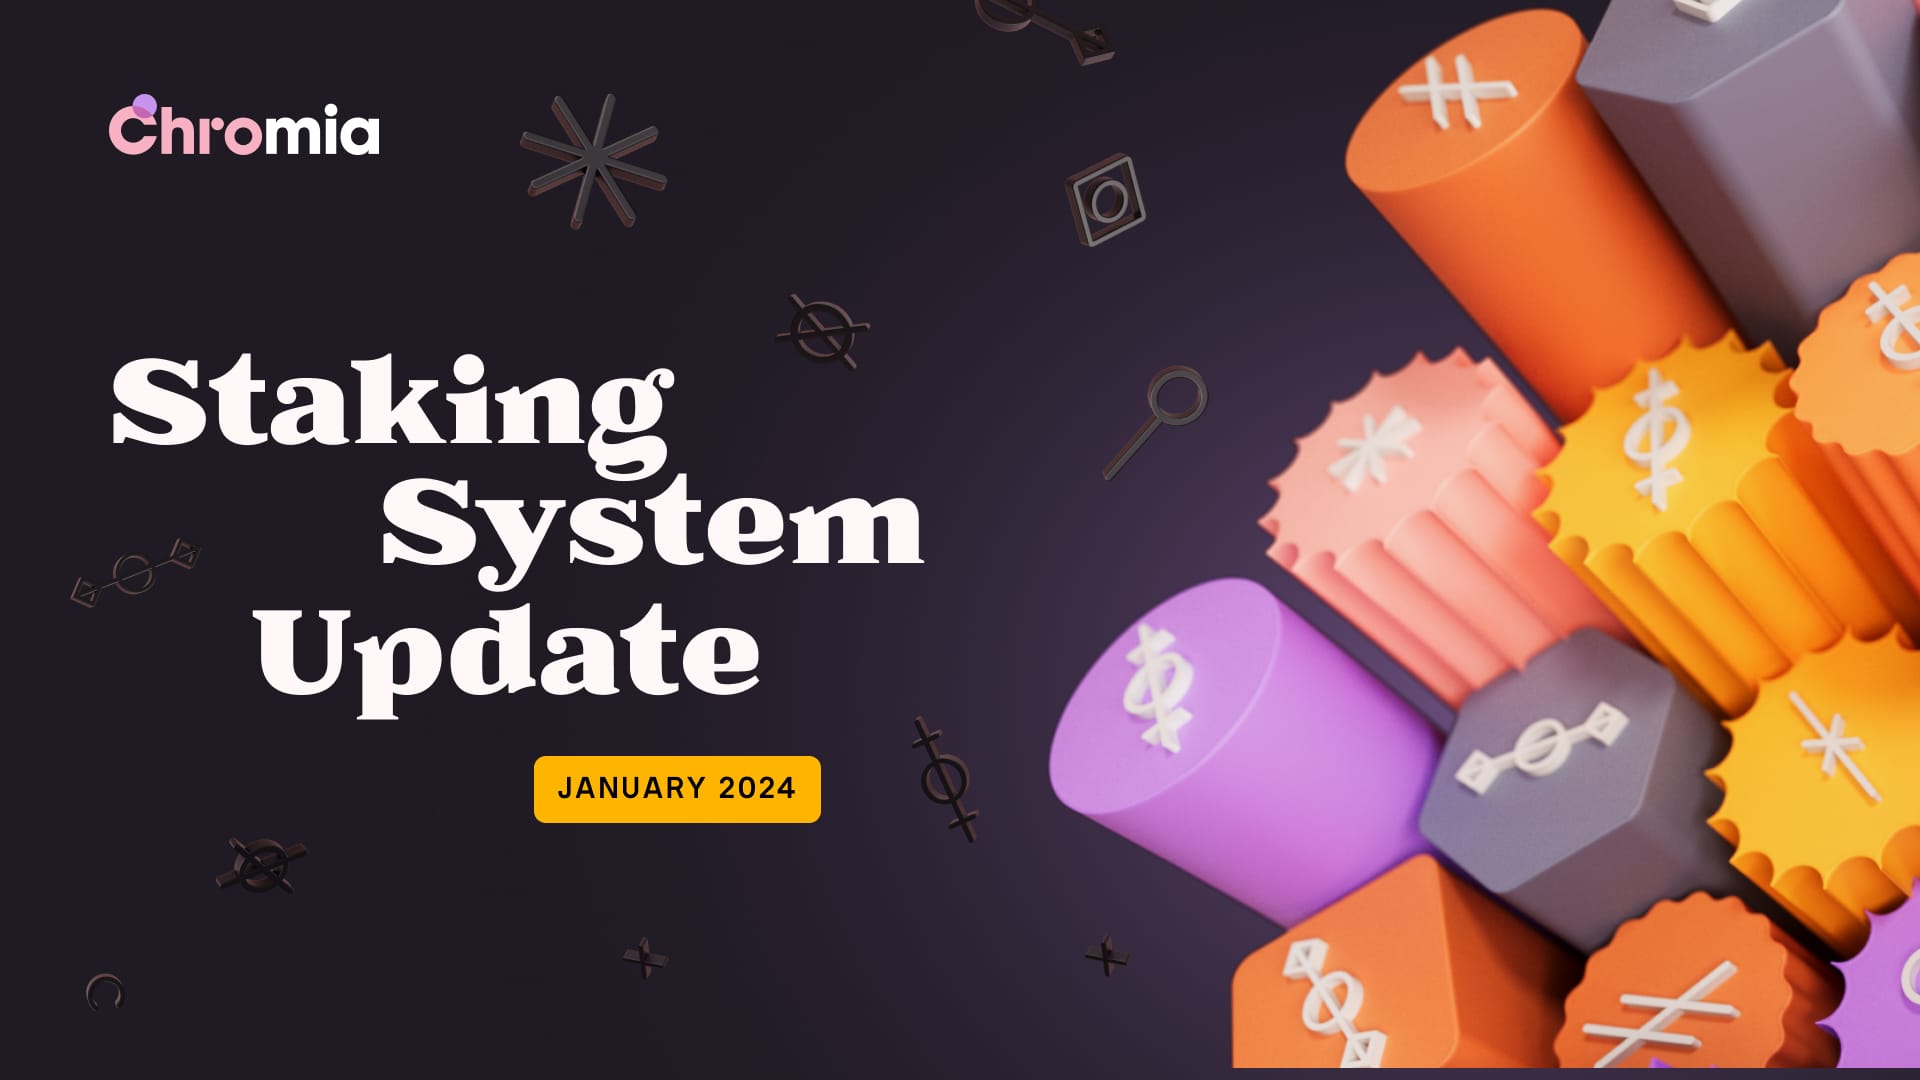 Staking System Update: Confirm your Delegate by March 3rd to Continue Receiving Rewards